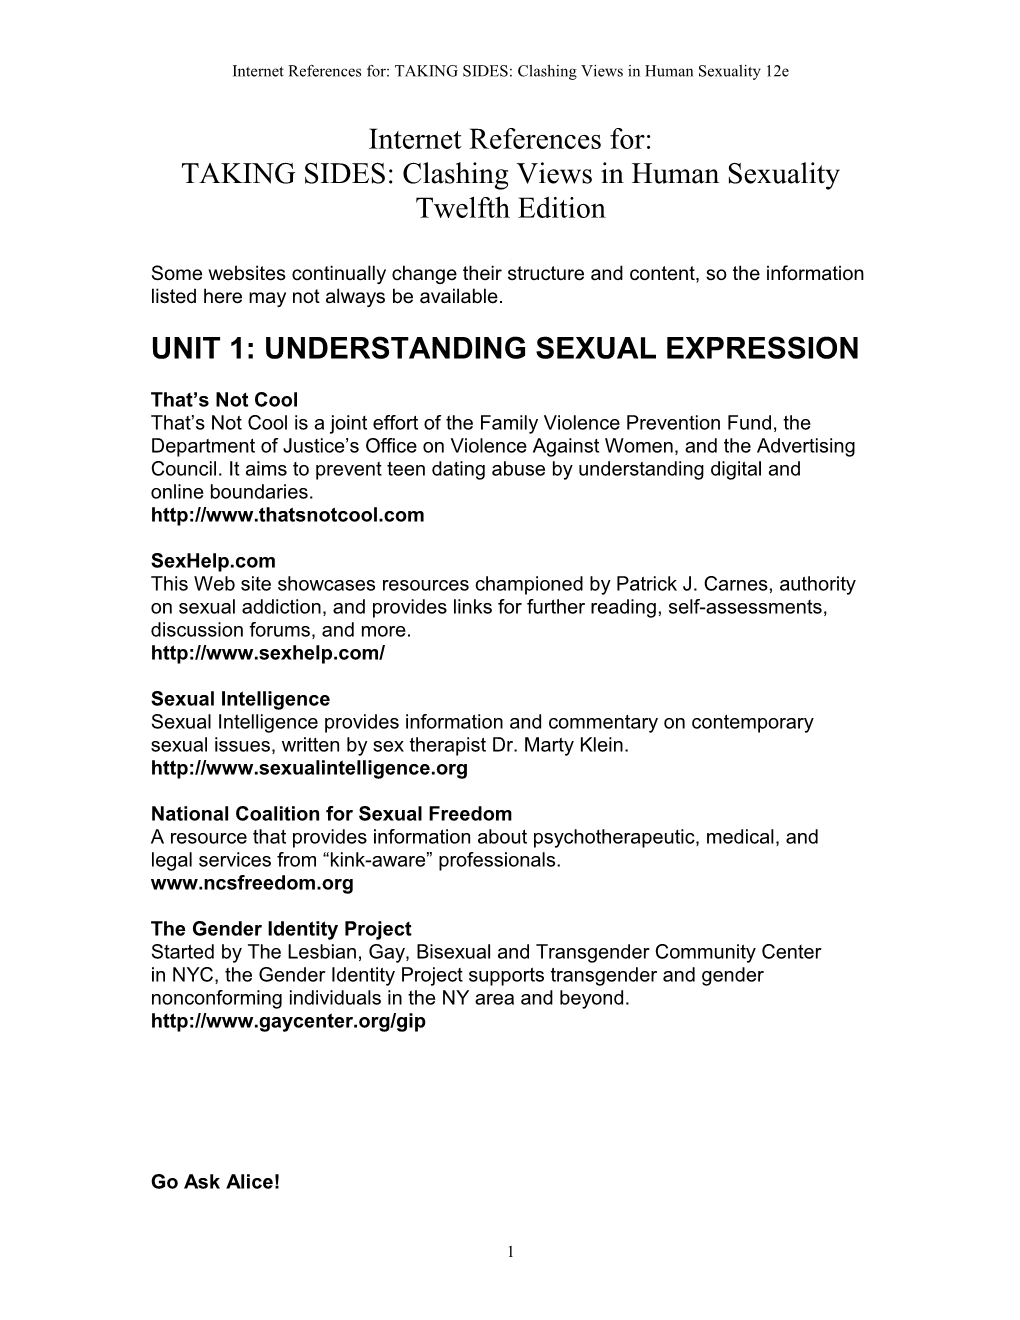 Internet References For: TAKING SIDES: Clashing Views in Human Sexuality 12E